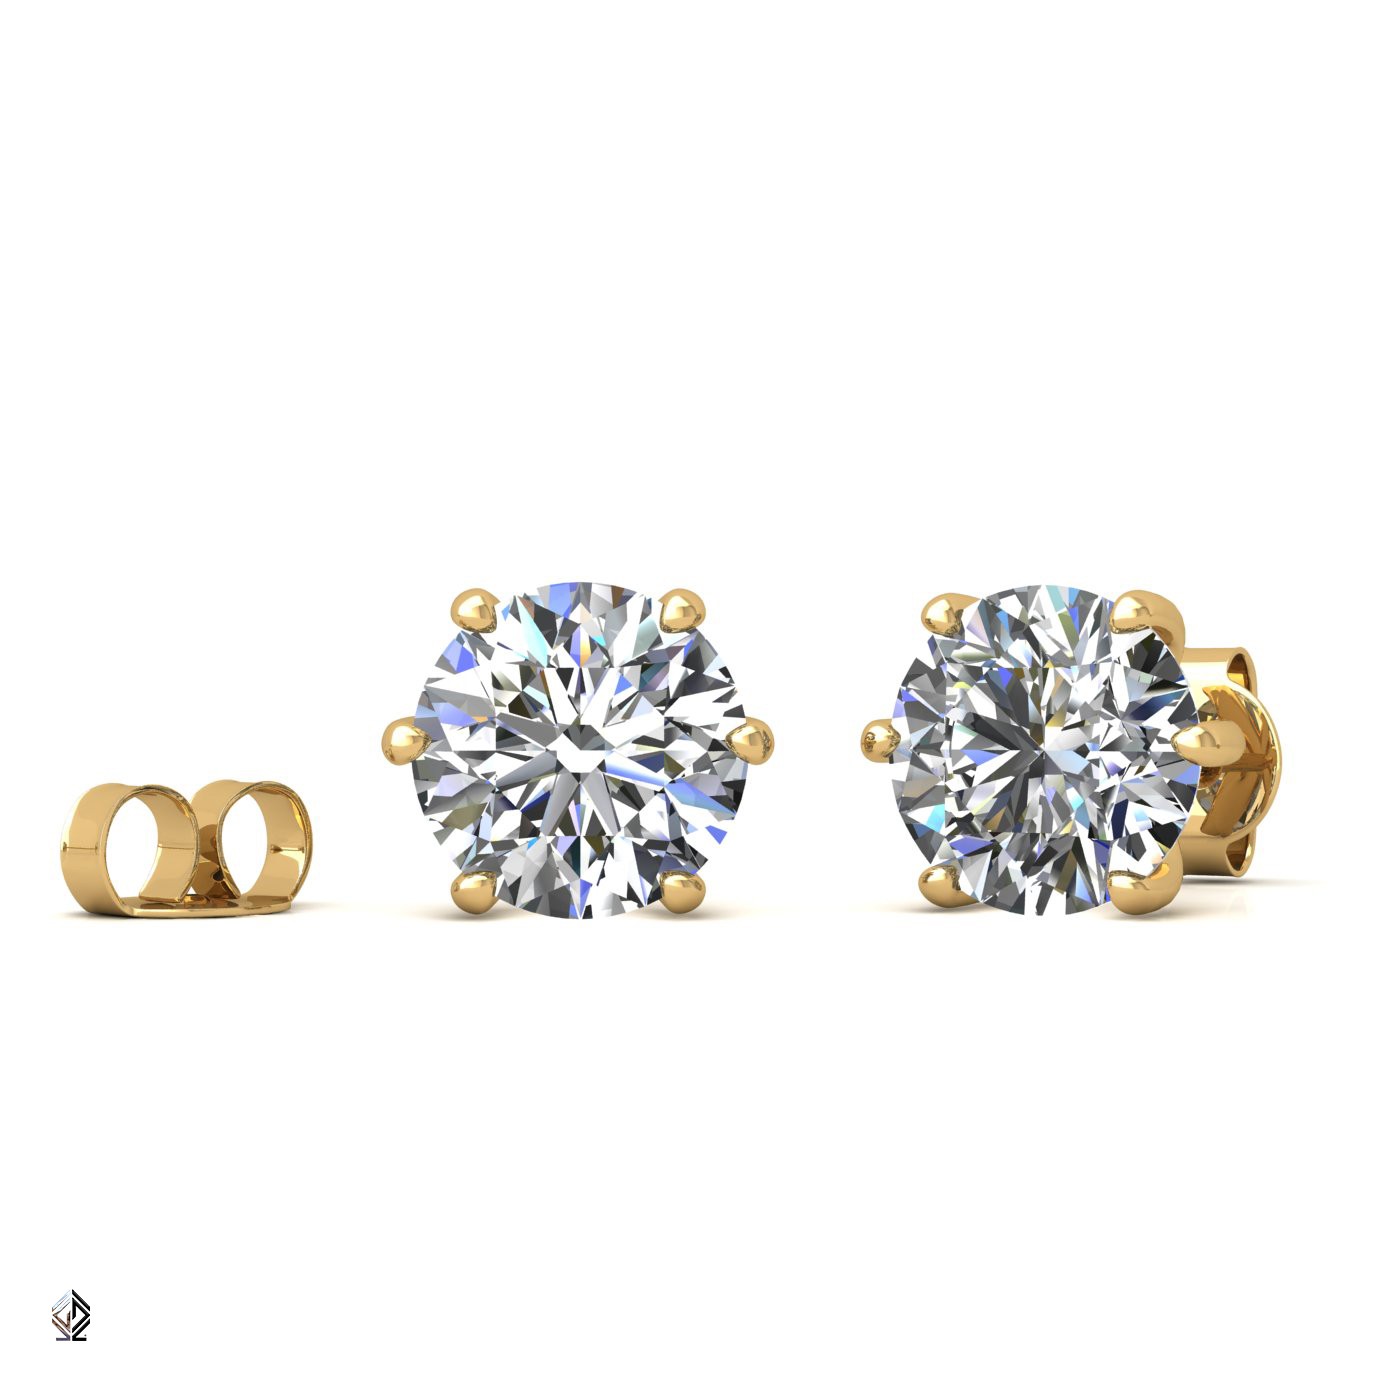 18k yellow gold 0,3 ct each (0,6 tcw) 6 prongs round shape diamond earrings Photos & images